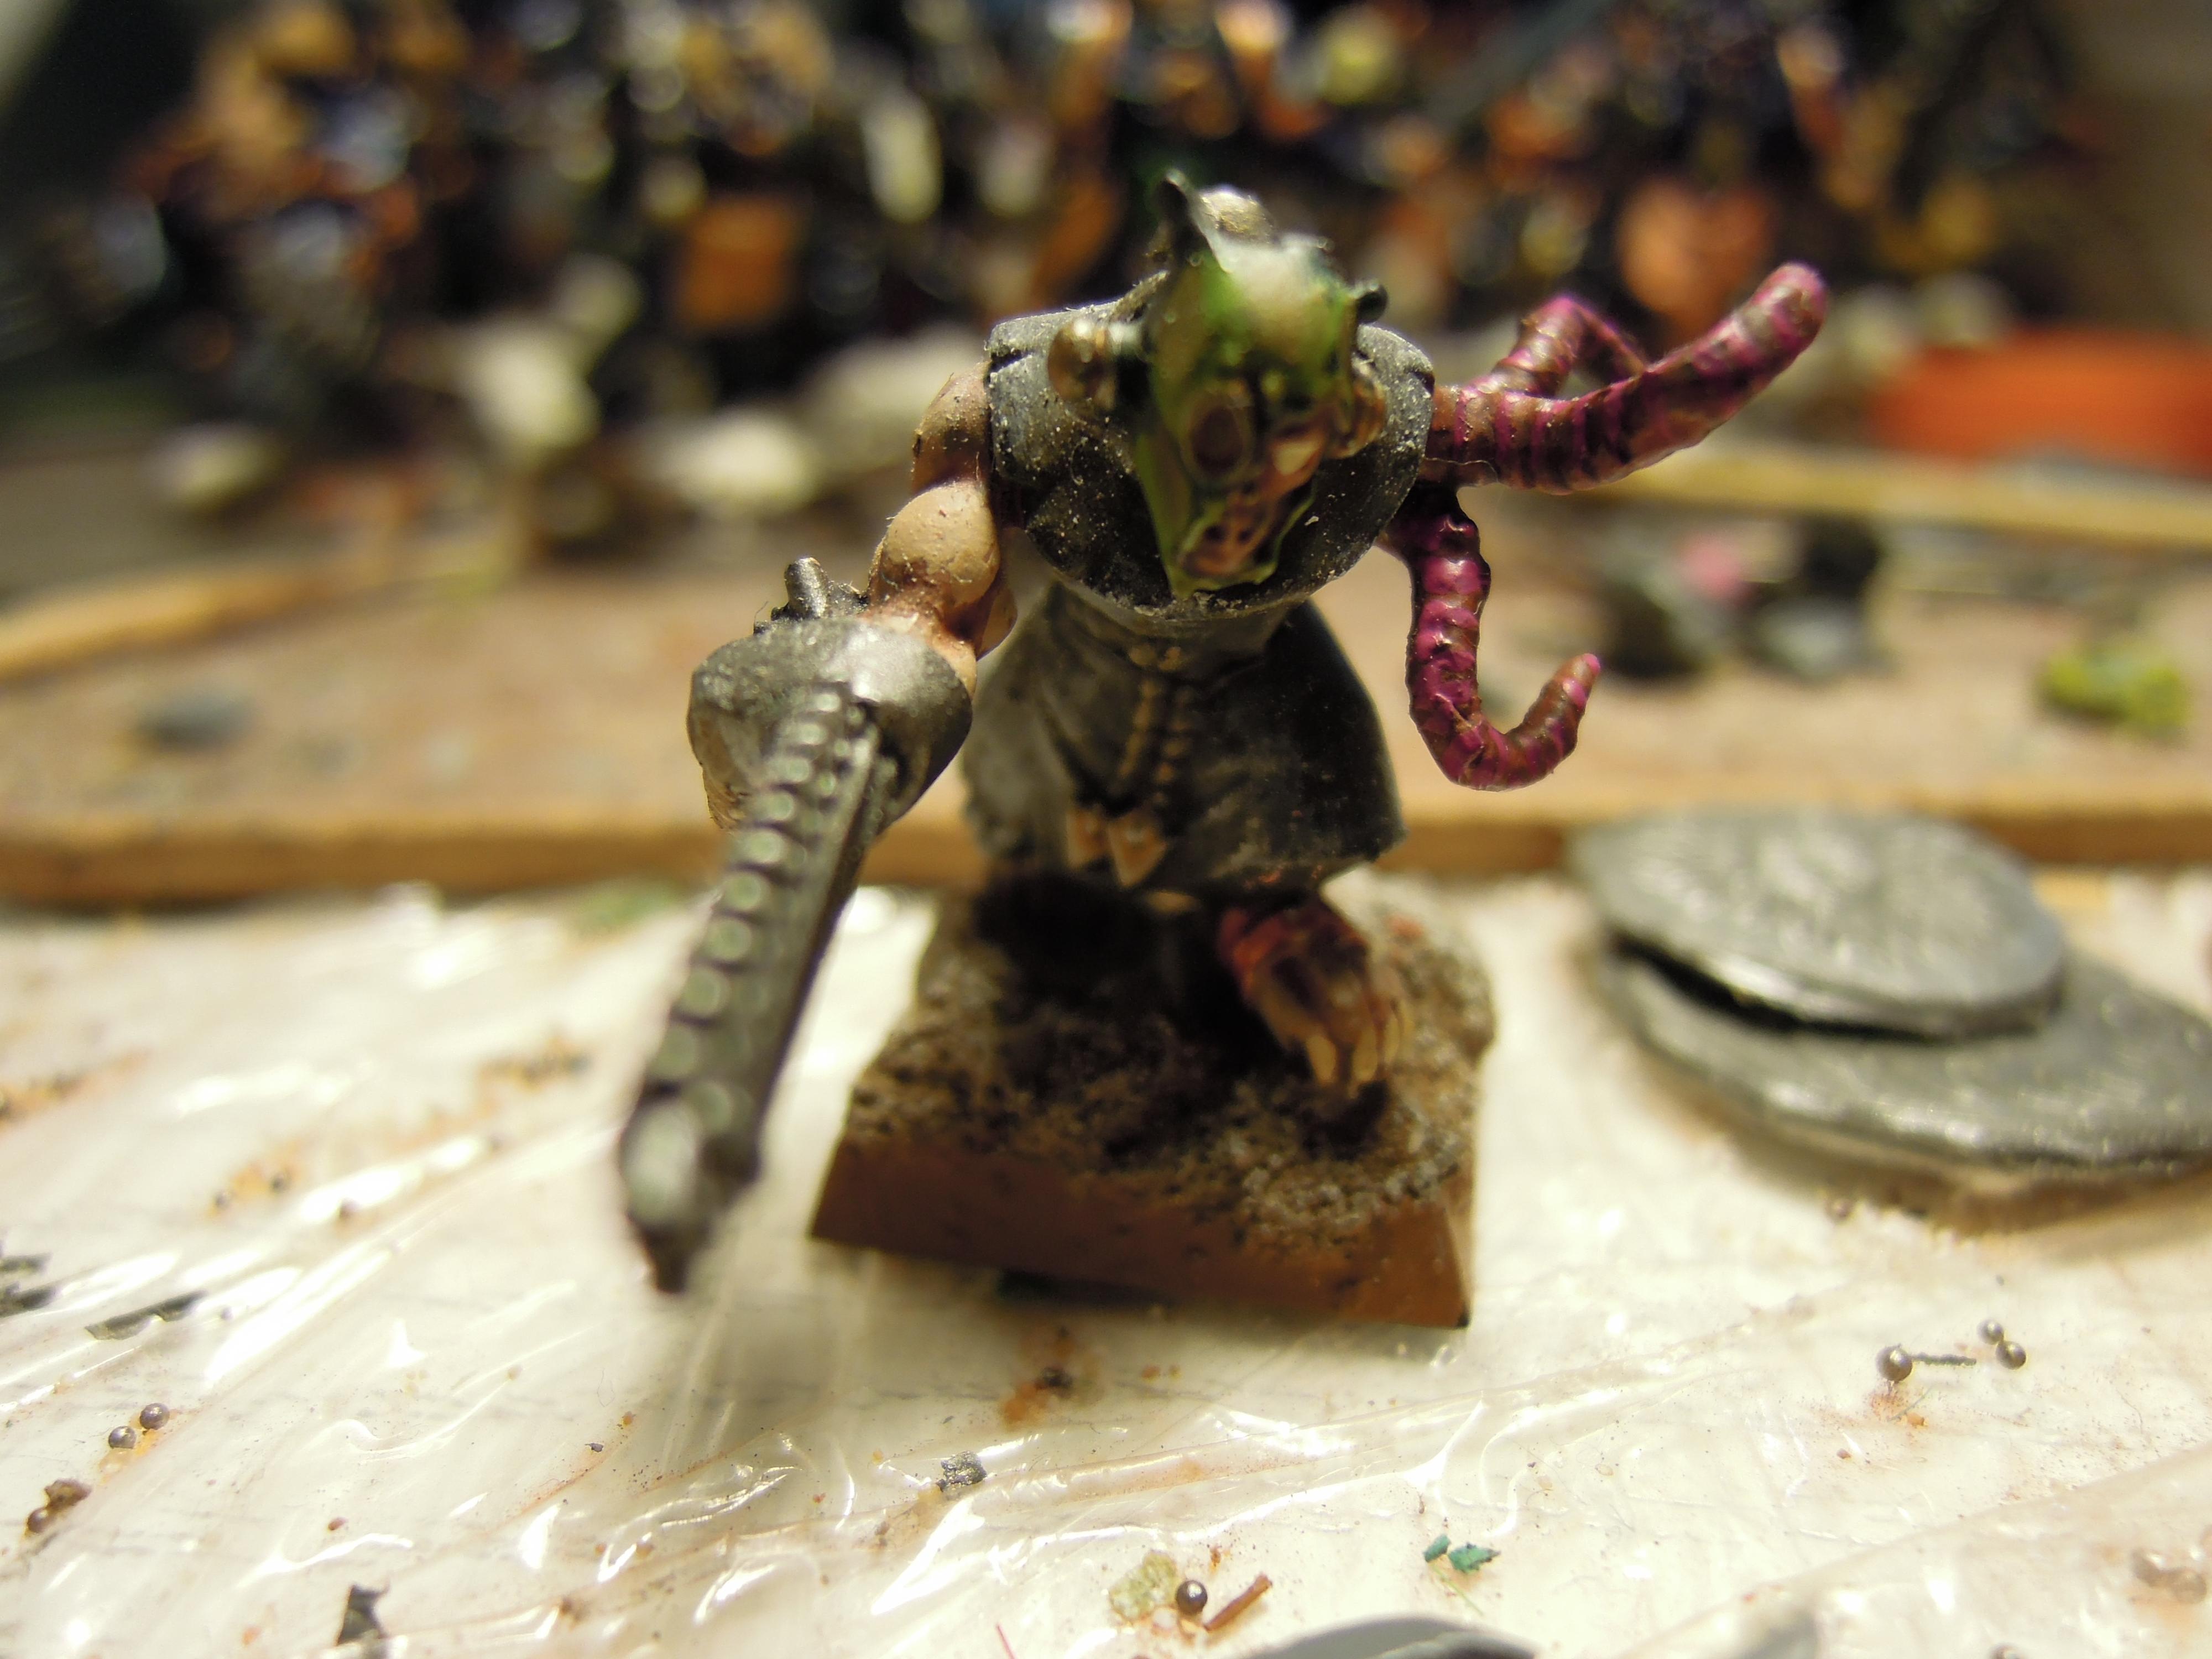 Chain Sword, Chaos, Conversion, Mutant, Scavengers, Tentacle, Warhammer 40,000